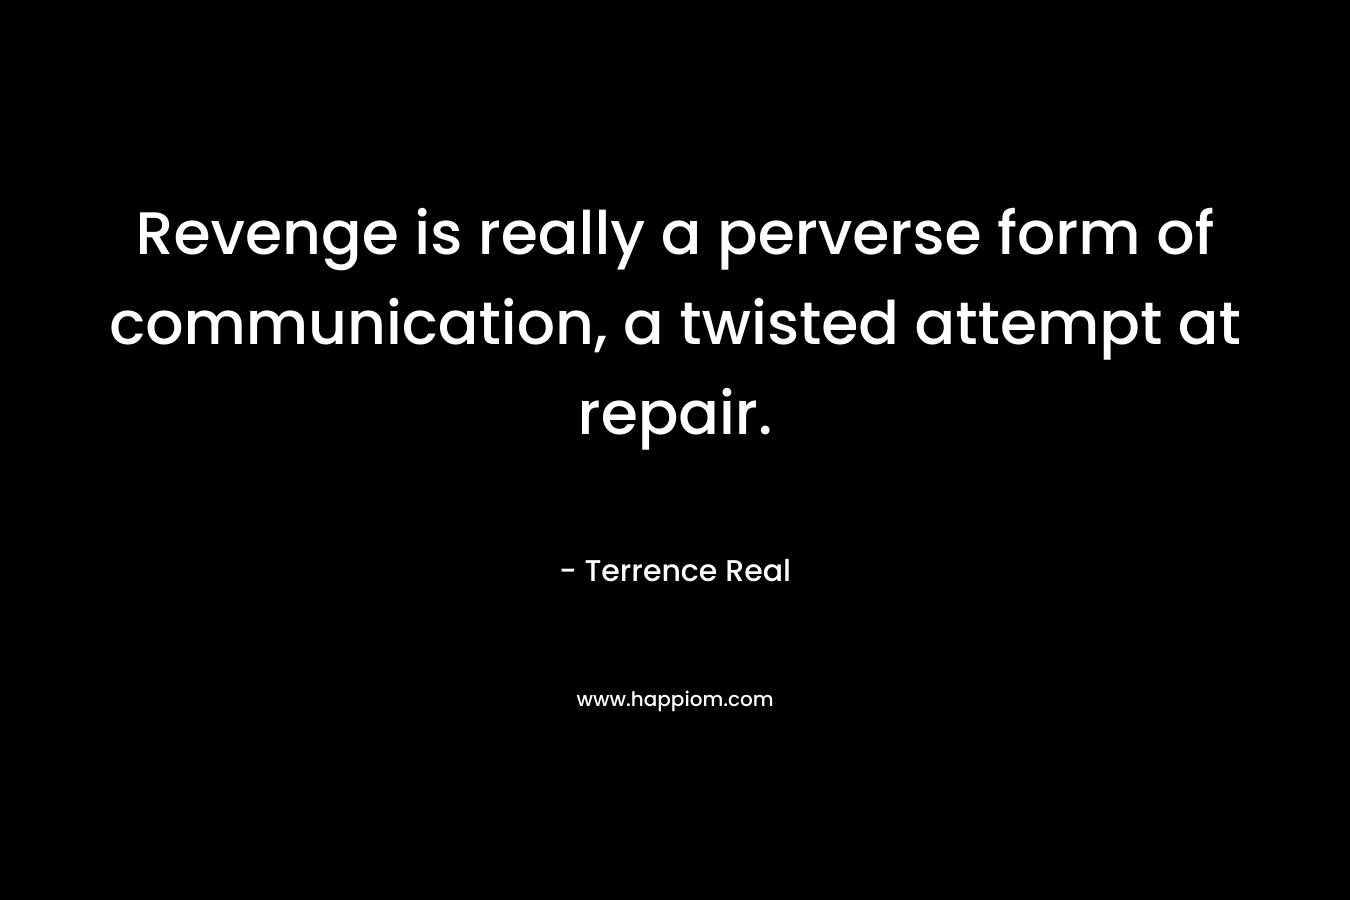 Revenge is really a perverse form of communication, a twisted attempt at repair. – Terrence Real